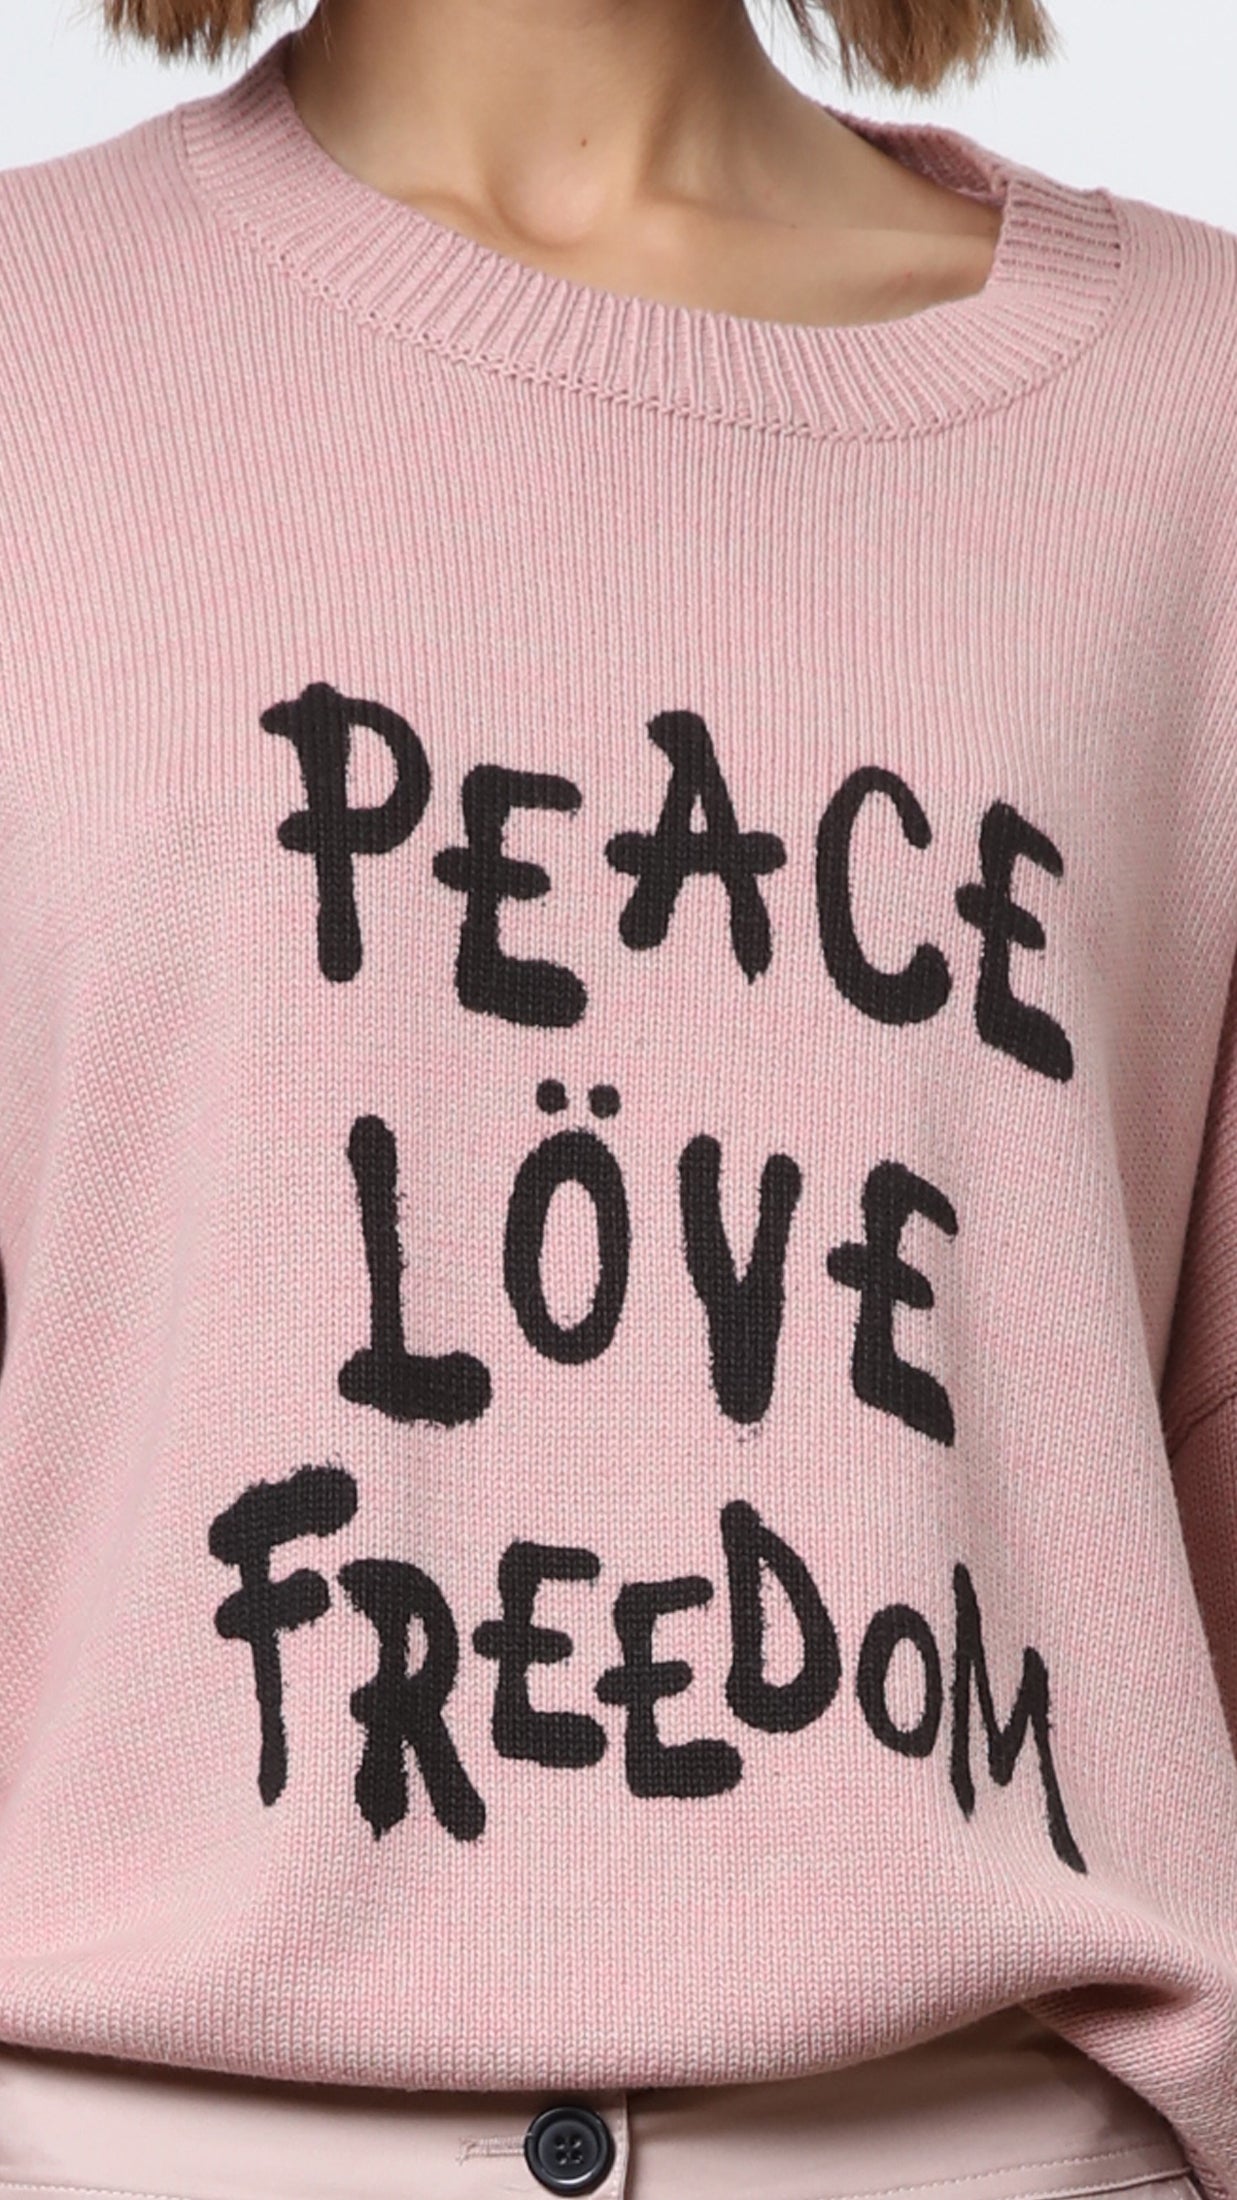 Peace Jumper (Dusty Pink/White) by Religion